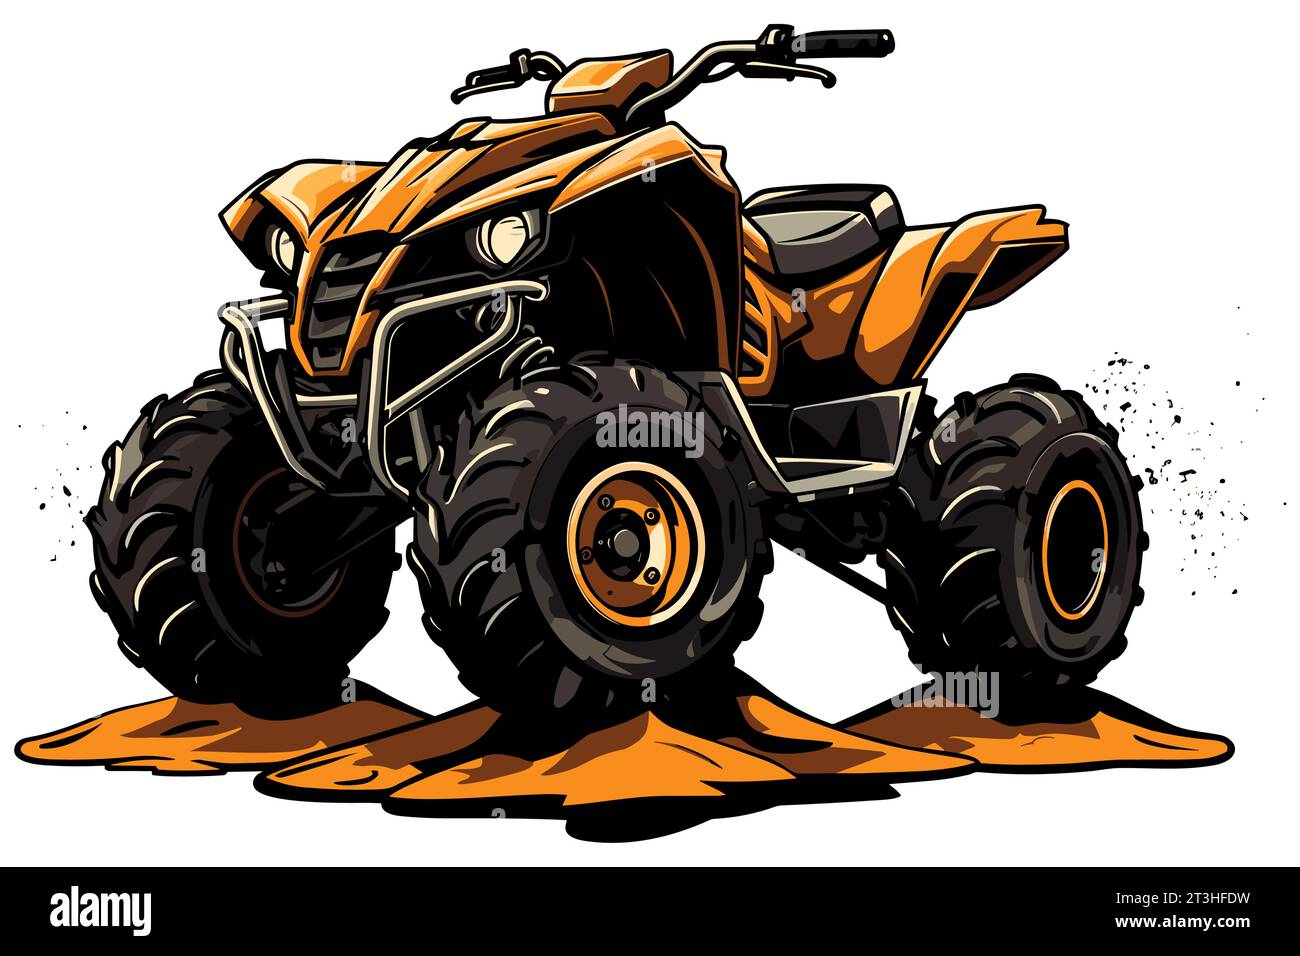 Vibrant illustration of orange all-terrain vehicle on sand, posed against white background, ready for rugged adventures. Stock Vector